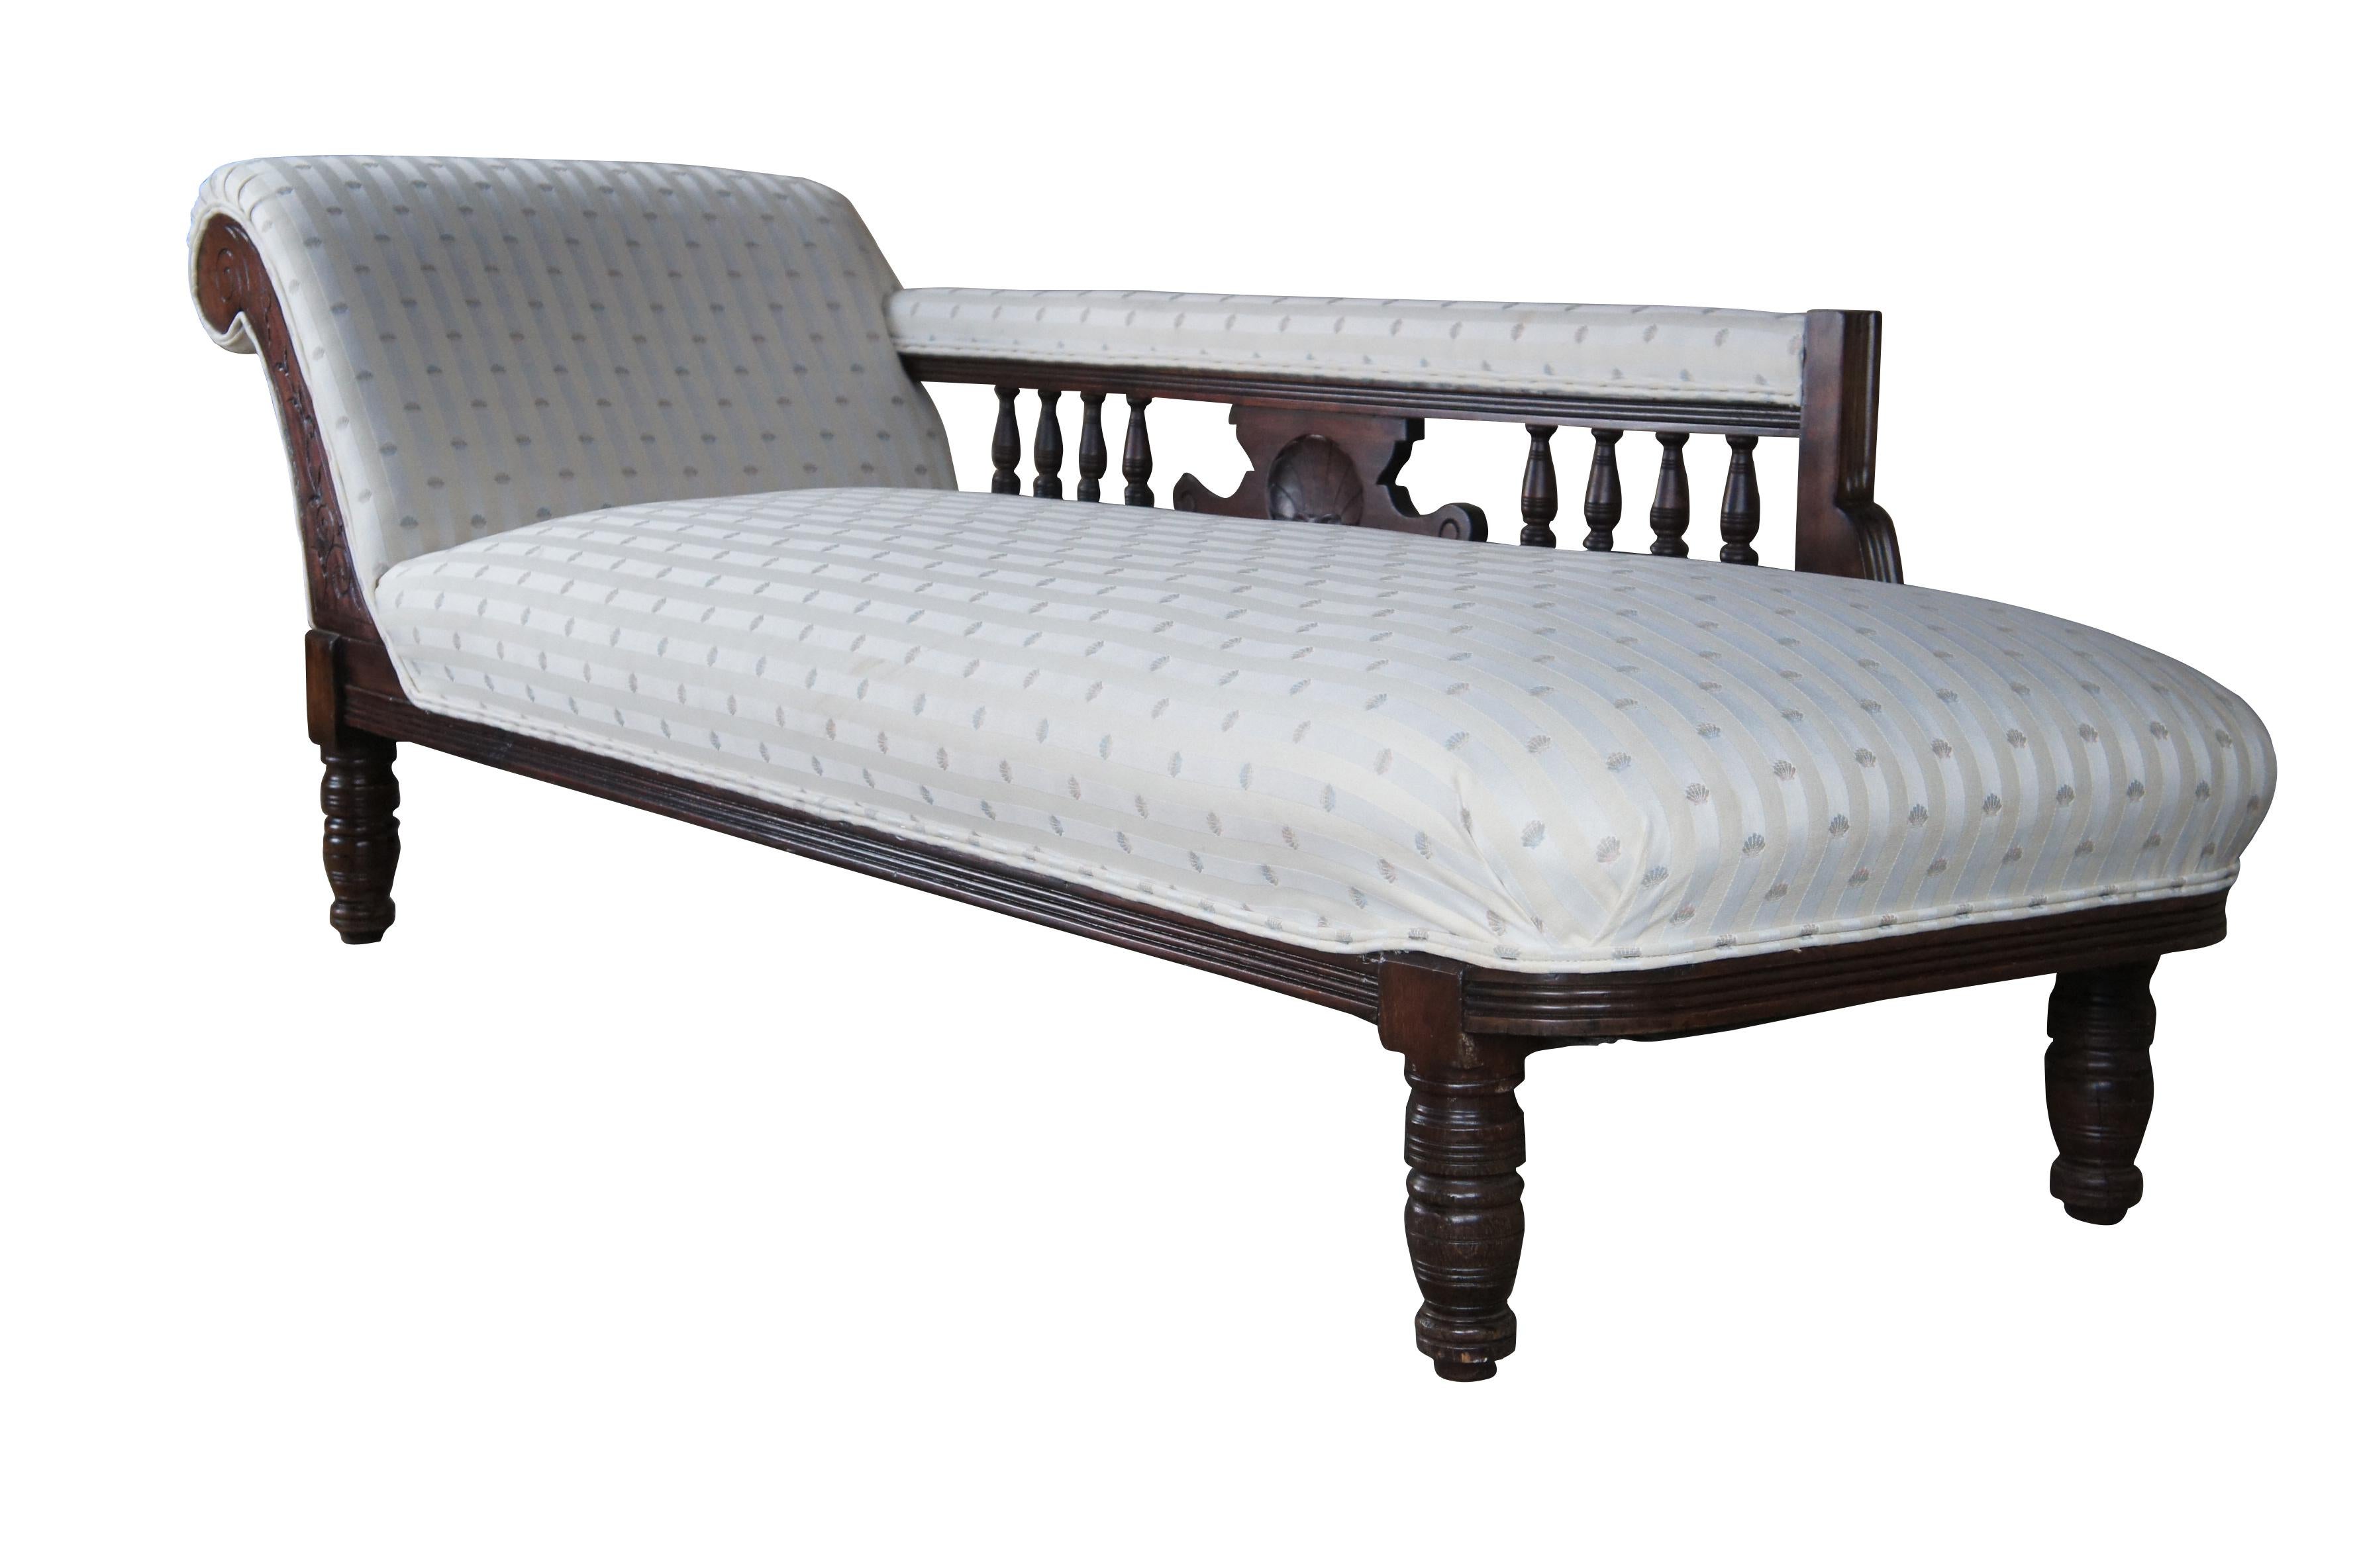 Antique Victorian parlor daybed / chaise lounge / fainting couch / recamier.  Made of mahogany featuring traditional Eastlake styling with a long pierced reticulated arm rest.  A very comfortable and functional antique furnishing.

The Récamier sofa